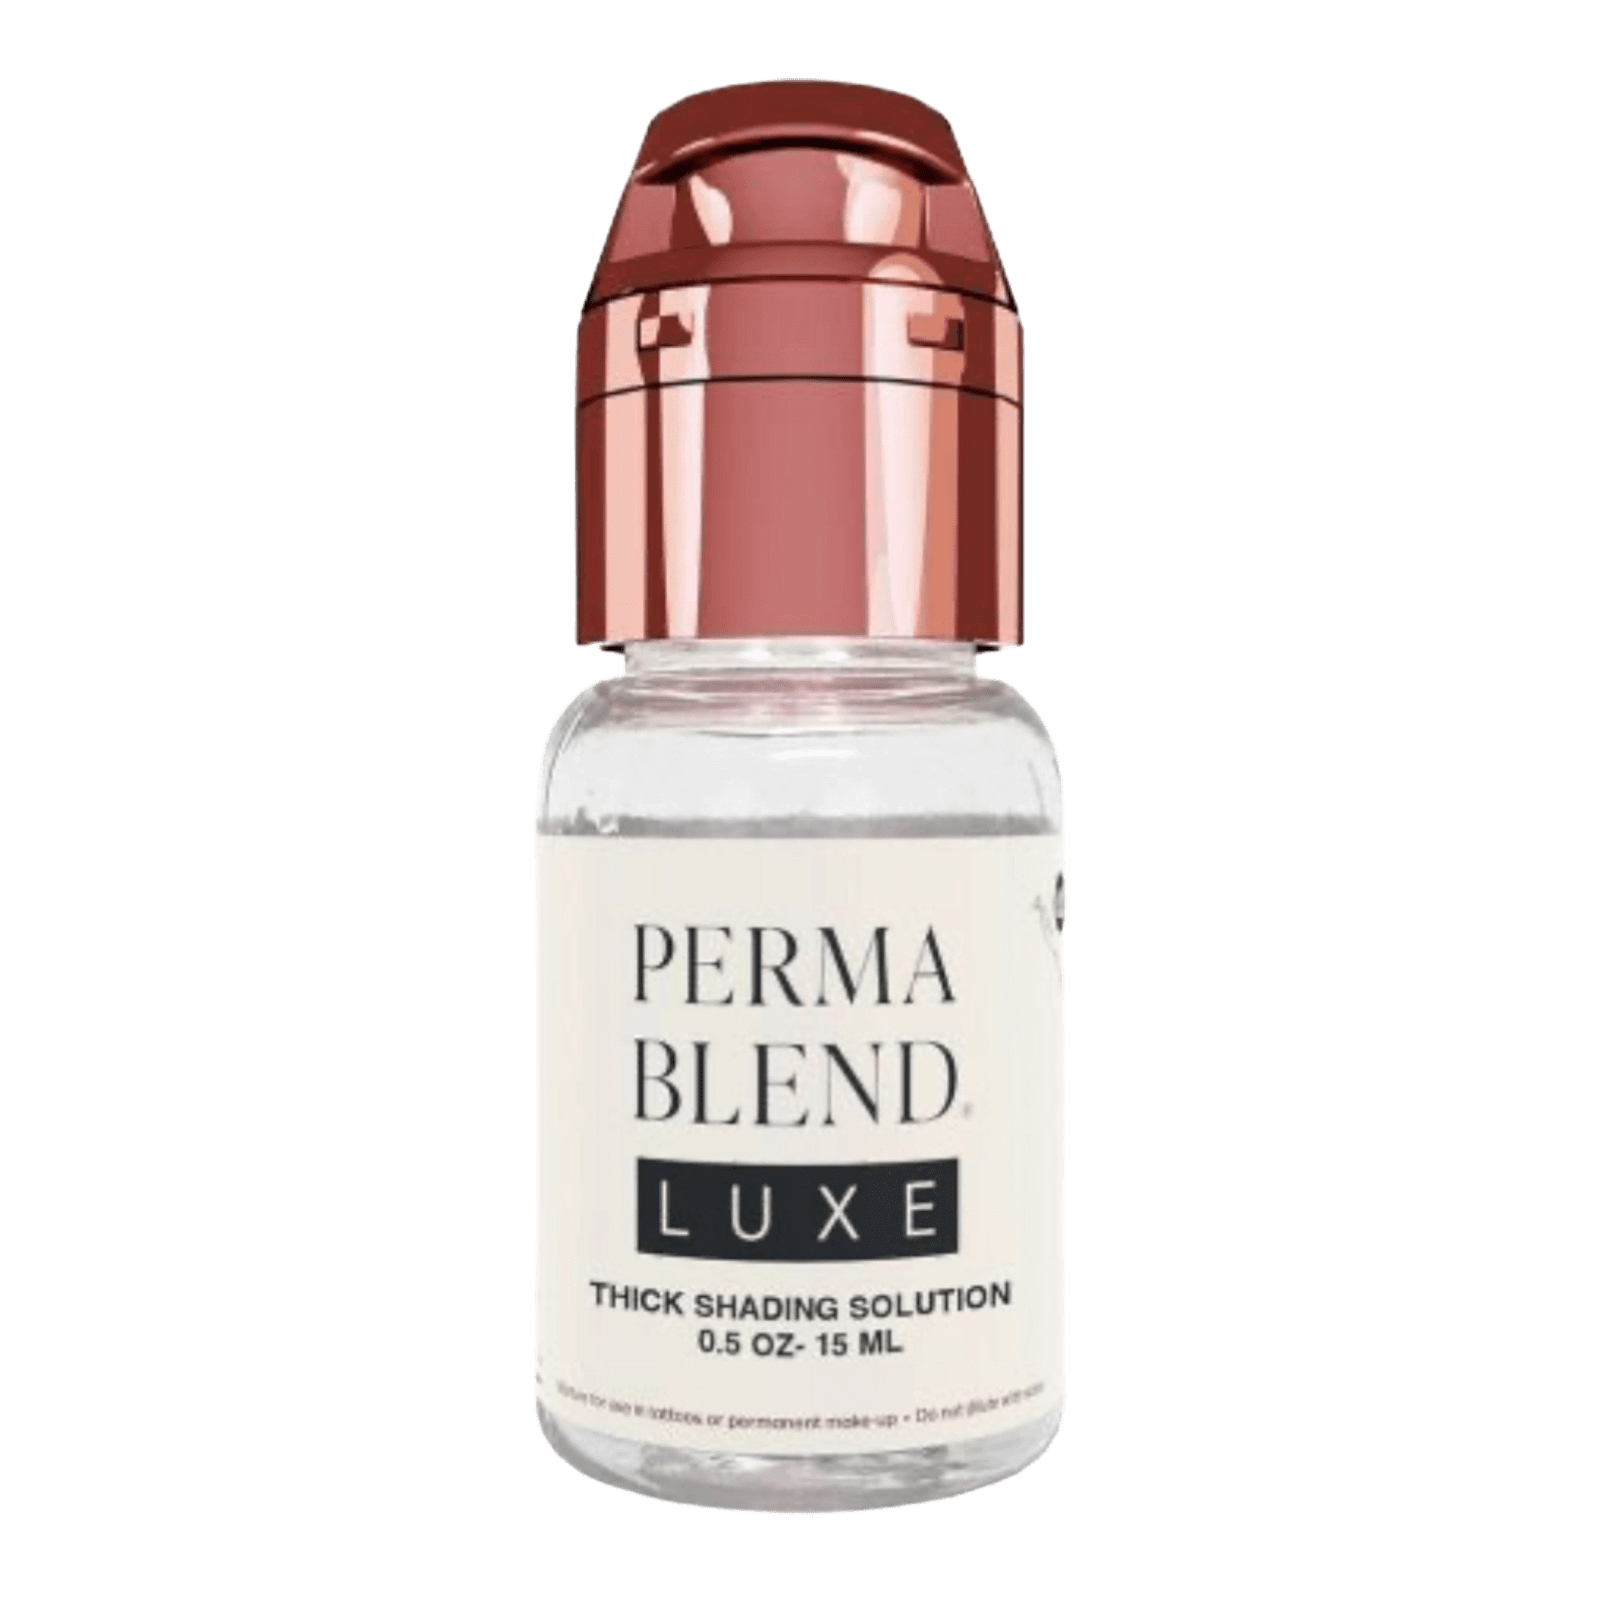 Perma Blend Luxe Thick Shading Solution